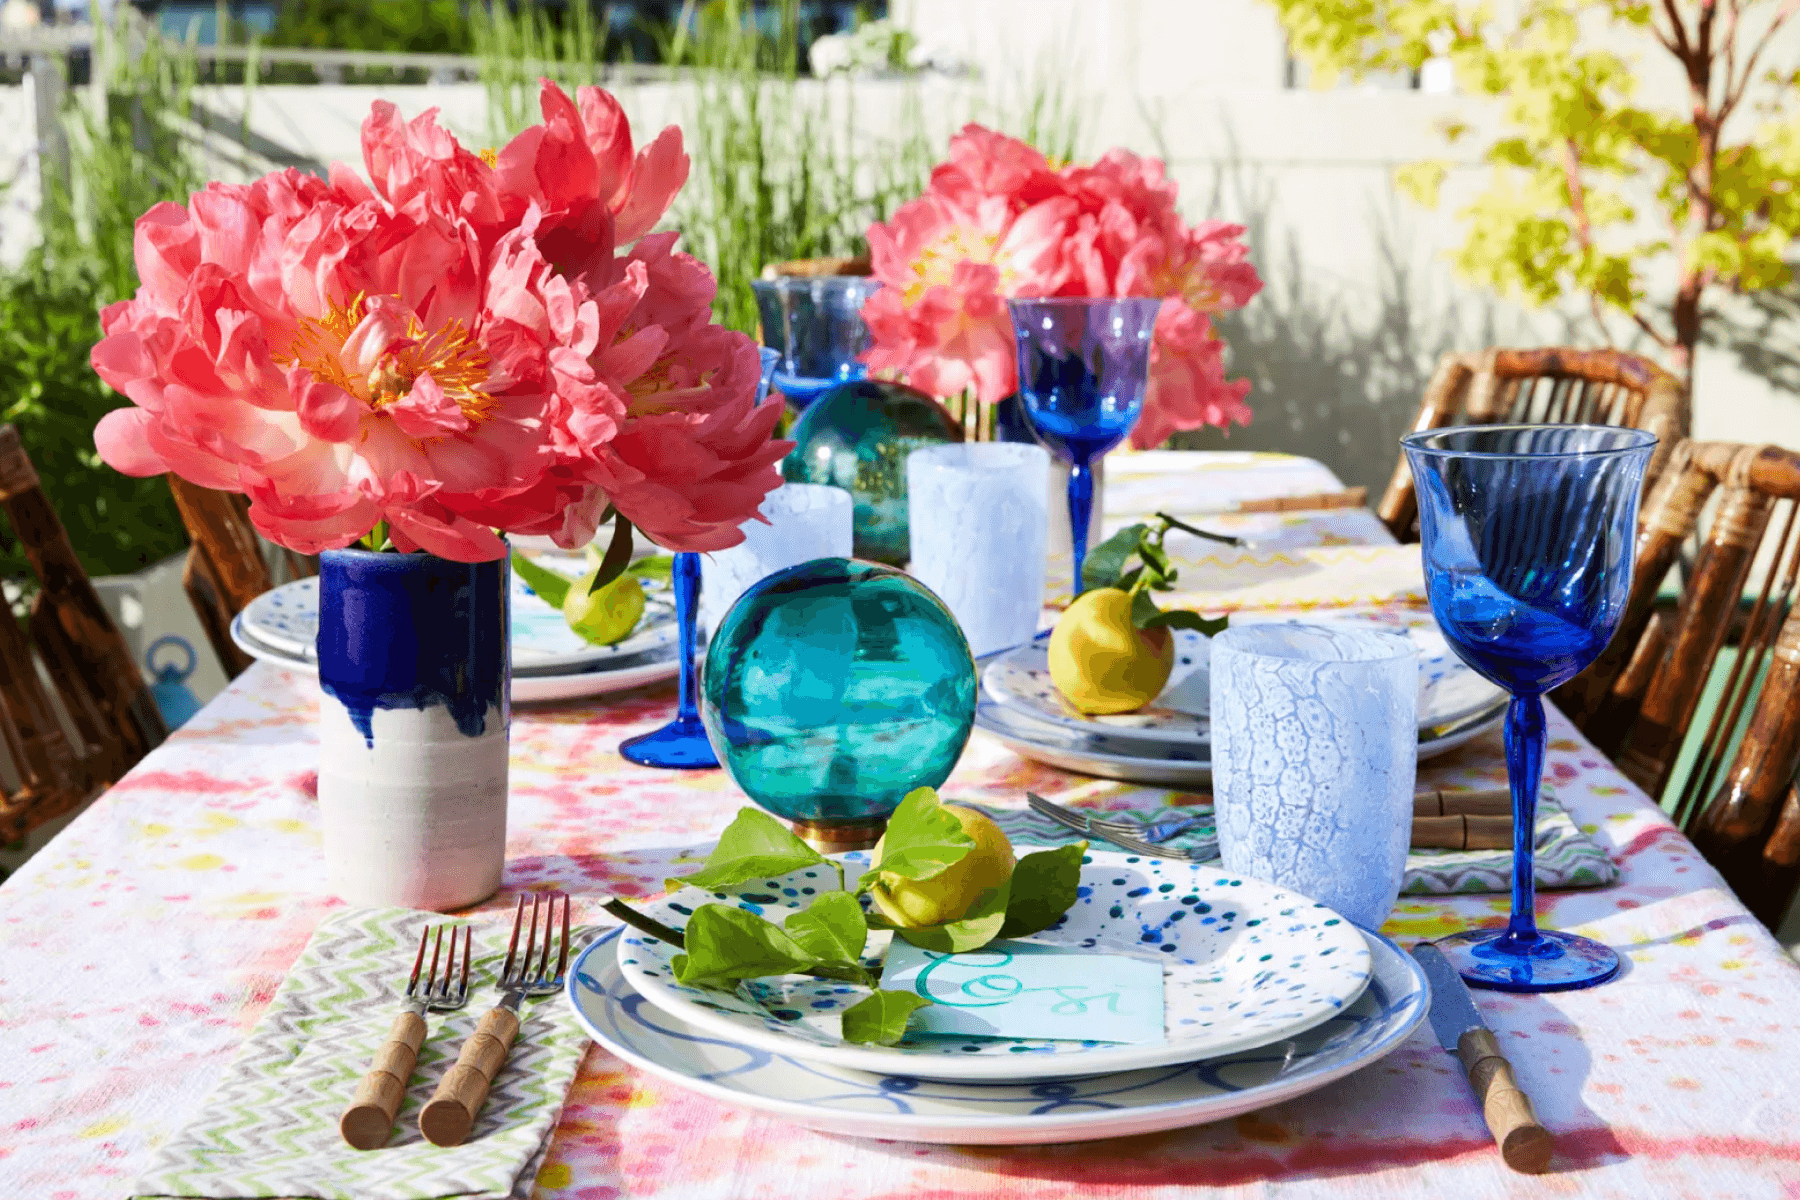 An outdoor table is set with blue glassware, and large pink flowers in vases.